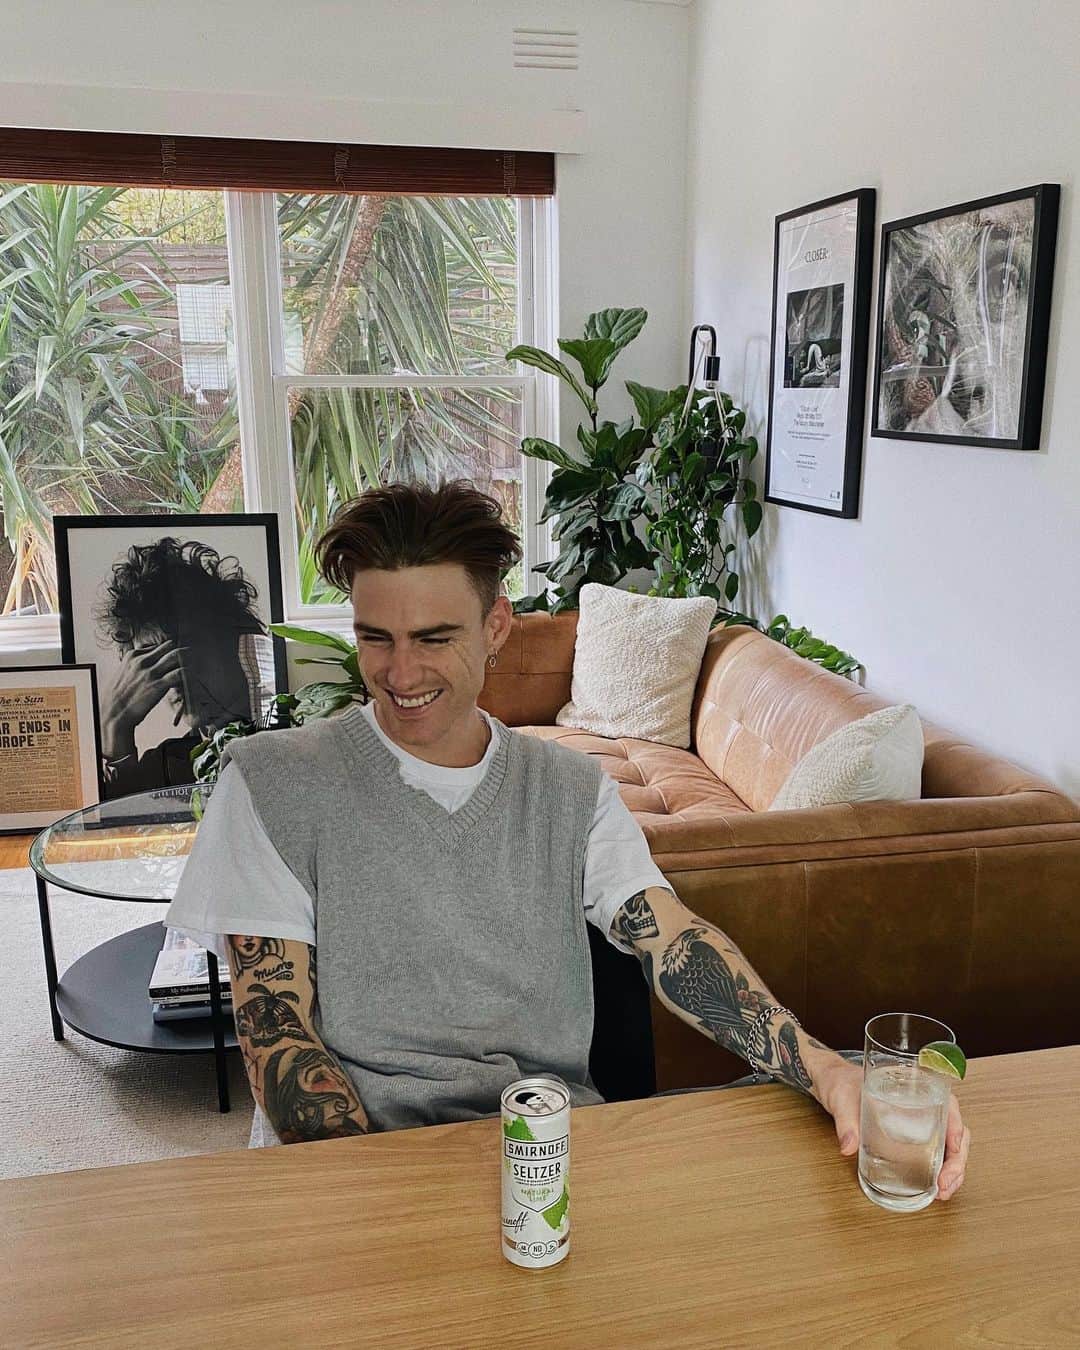 THOMAS DAVENPORTのインスタグラム：「#ad When choosing a drink for a summer afternoon, it's important to me that it's something light. The new Smirnoff Seltzer is the perfect option as it has no sugar, 68 calories, and is refreshing in taste. // @smirnoffaustralia #smirnoffseltzer #drinkresponsibly」